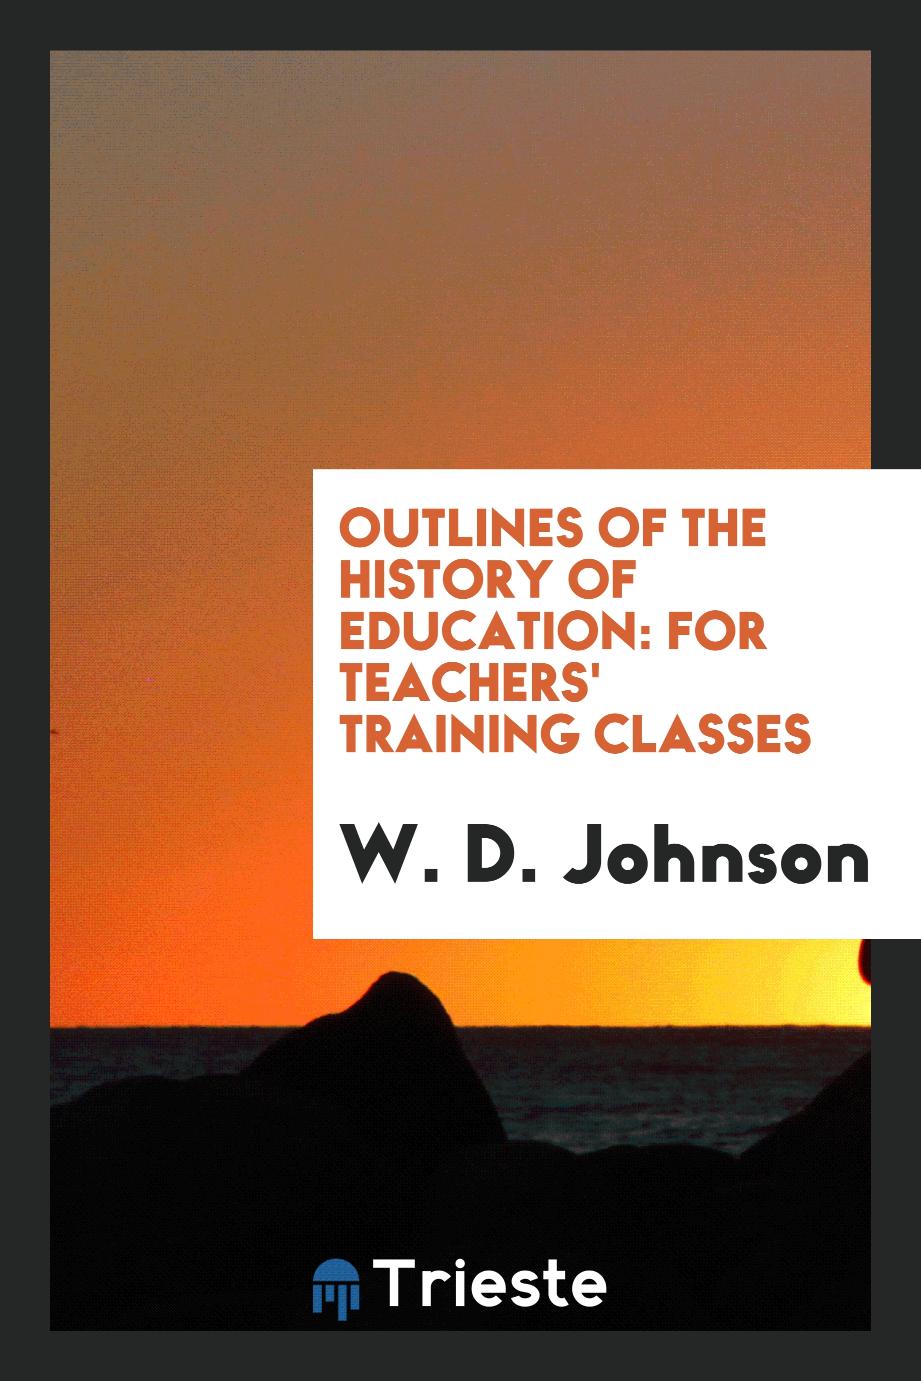 Outlines of the History of Education: For Teachers' Training Classes